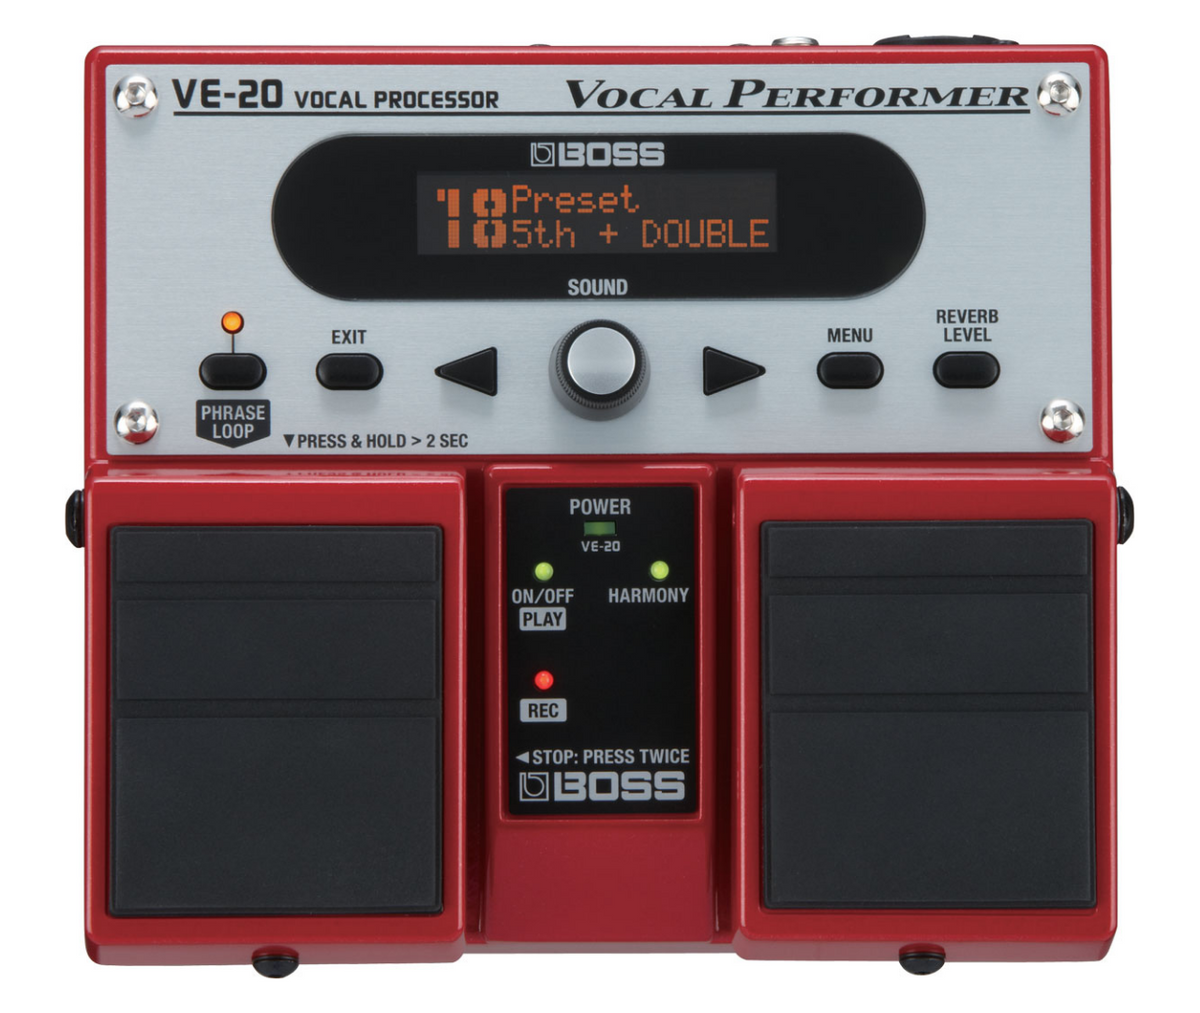 BOSS VE-20 Vocal Performer Best Audio Effects with Realtime Pitch-correction Tools and Special FX, including Distortion, Radio and Strobe